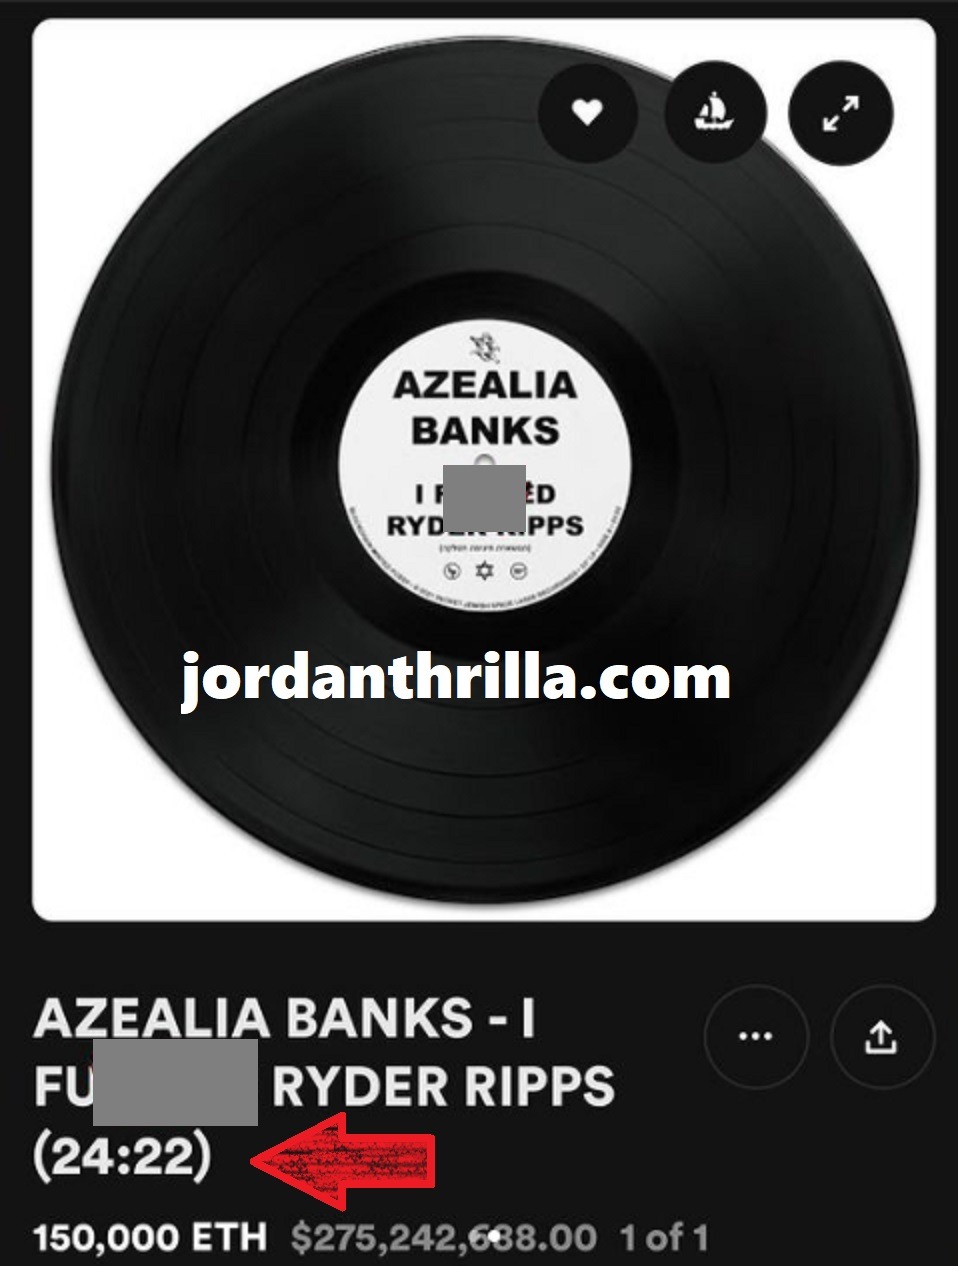 Azealia Banks $ex Tape With Fiance Ryder Ripps for $275 Million